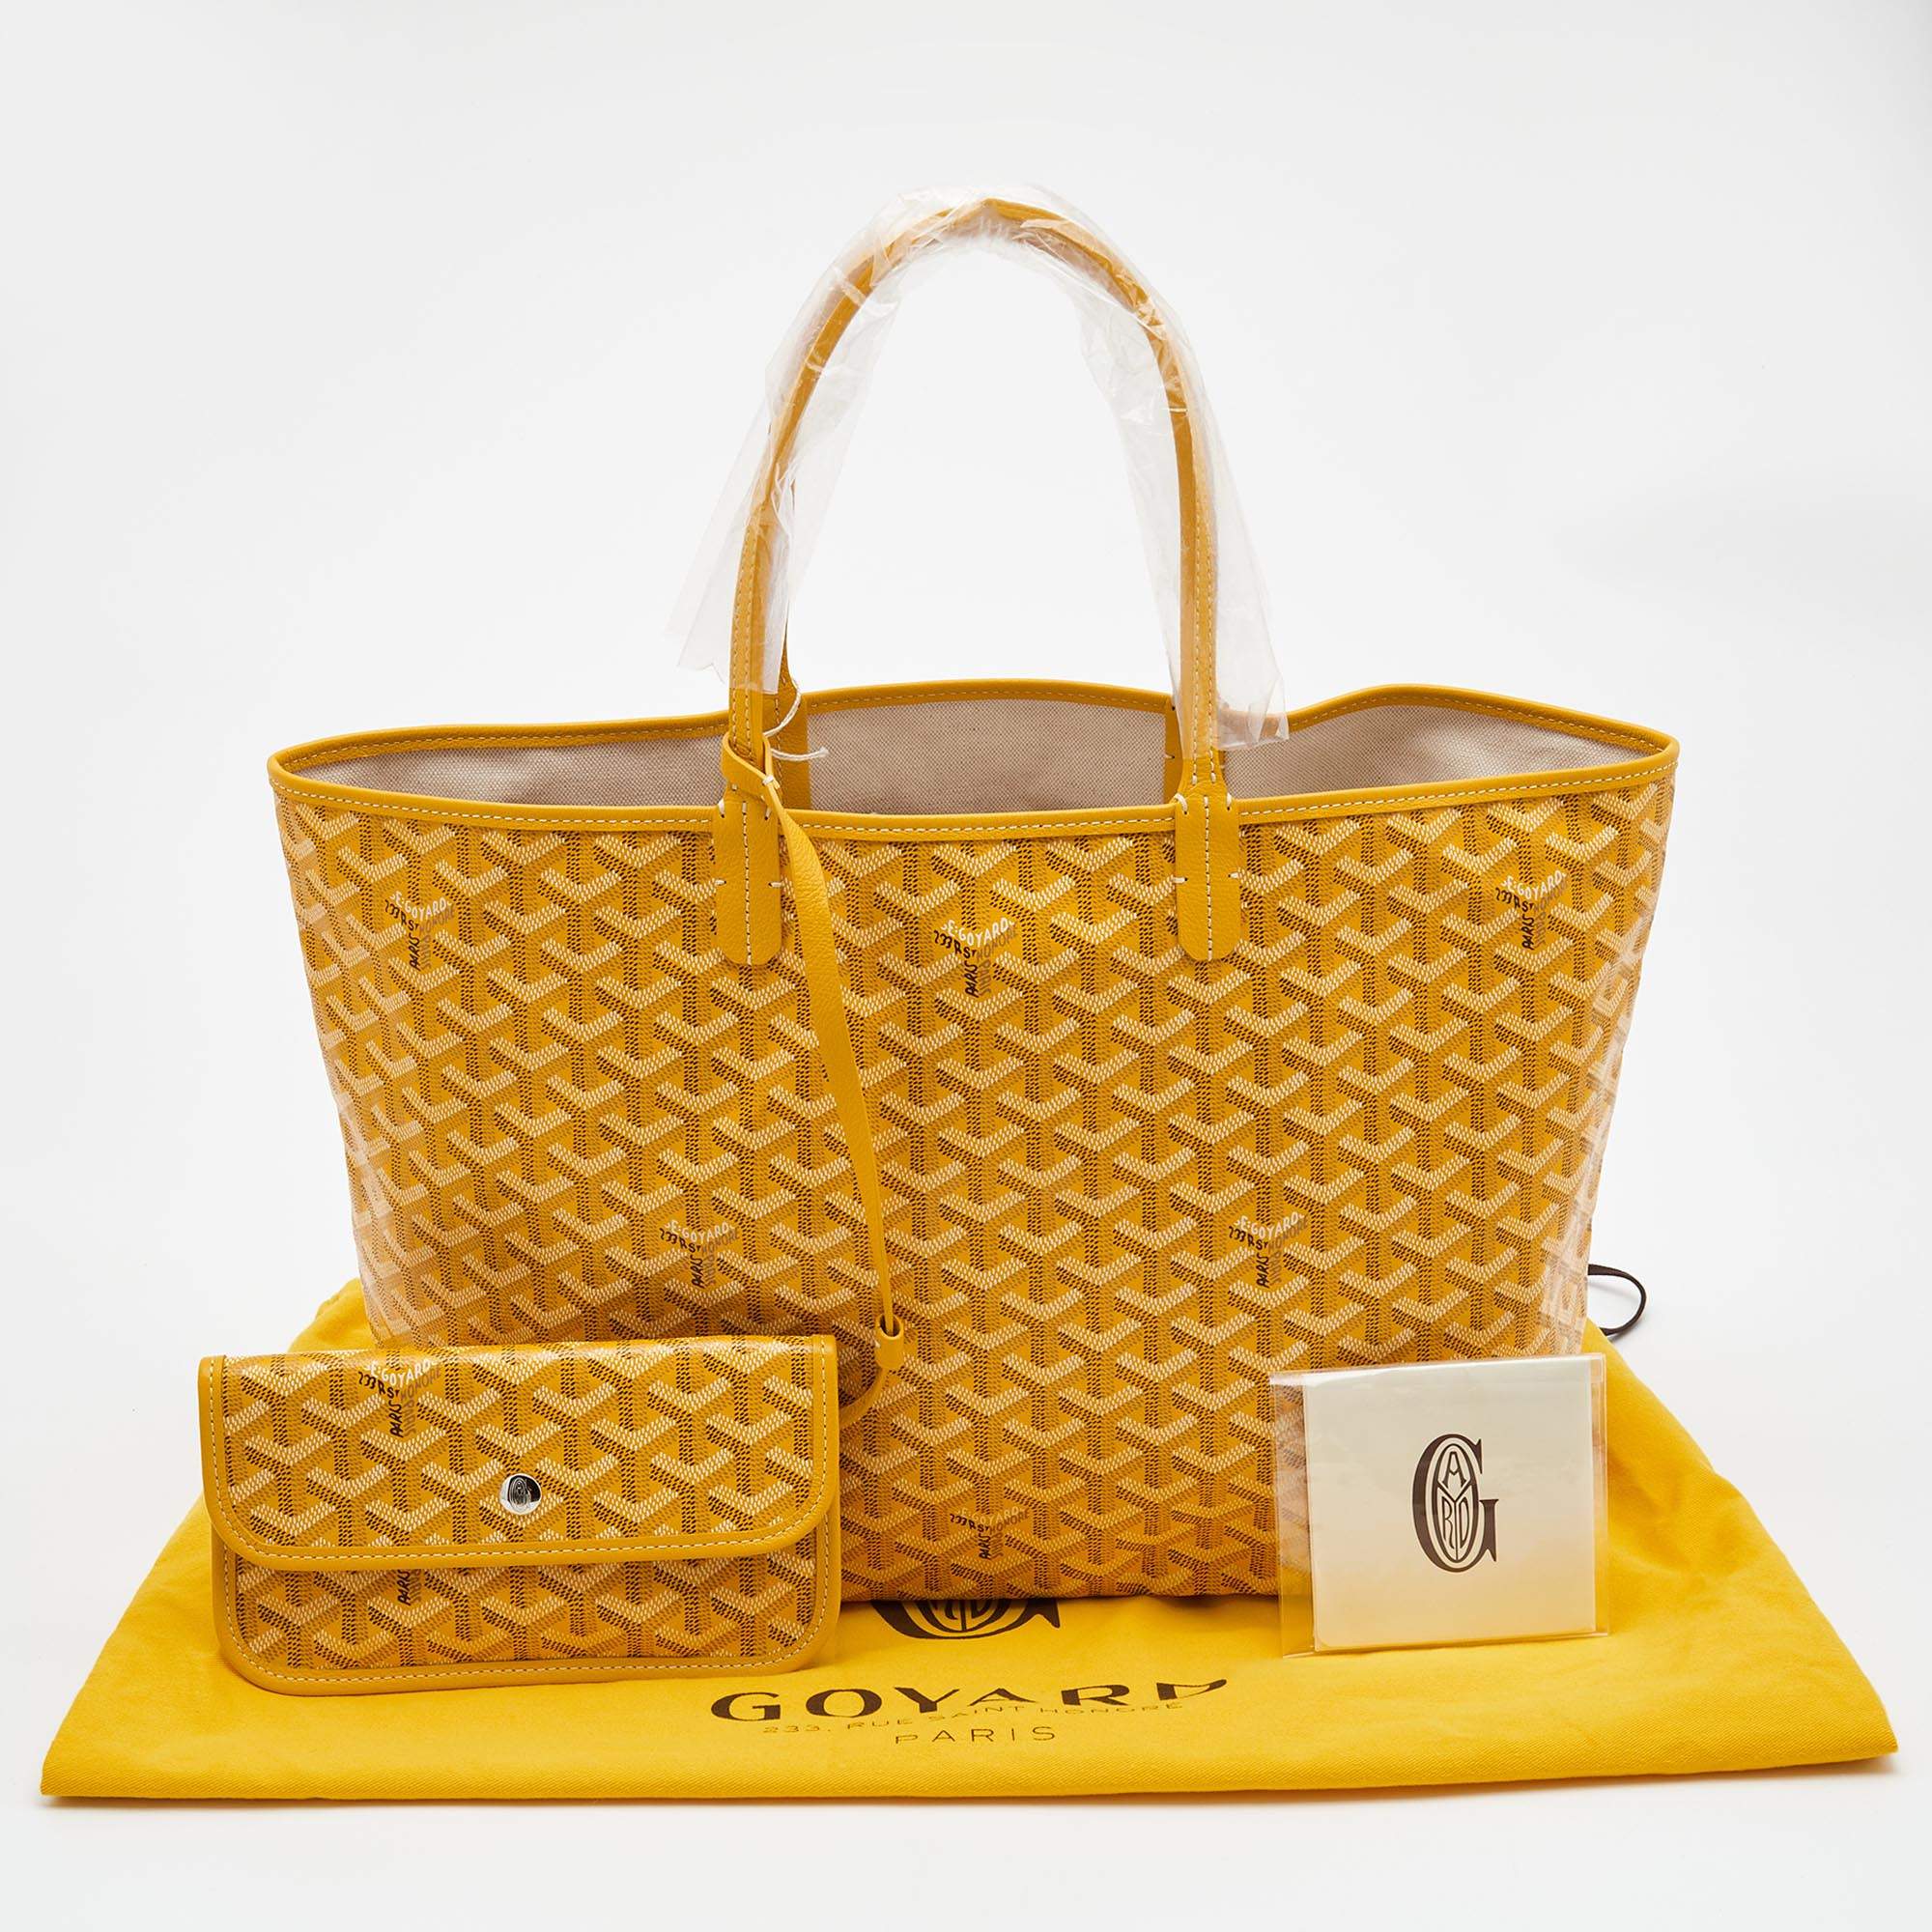 Shop GOYARD Online Now: Discover Pink [GOYARD] Items at the Best Prices